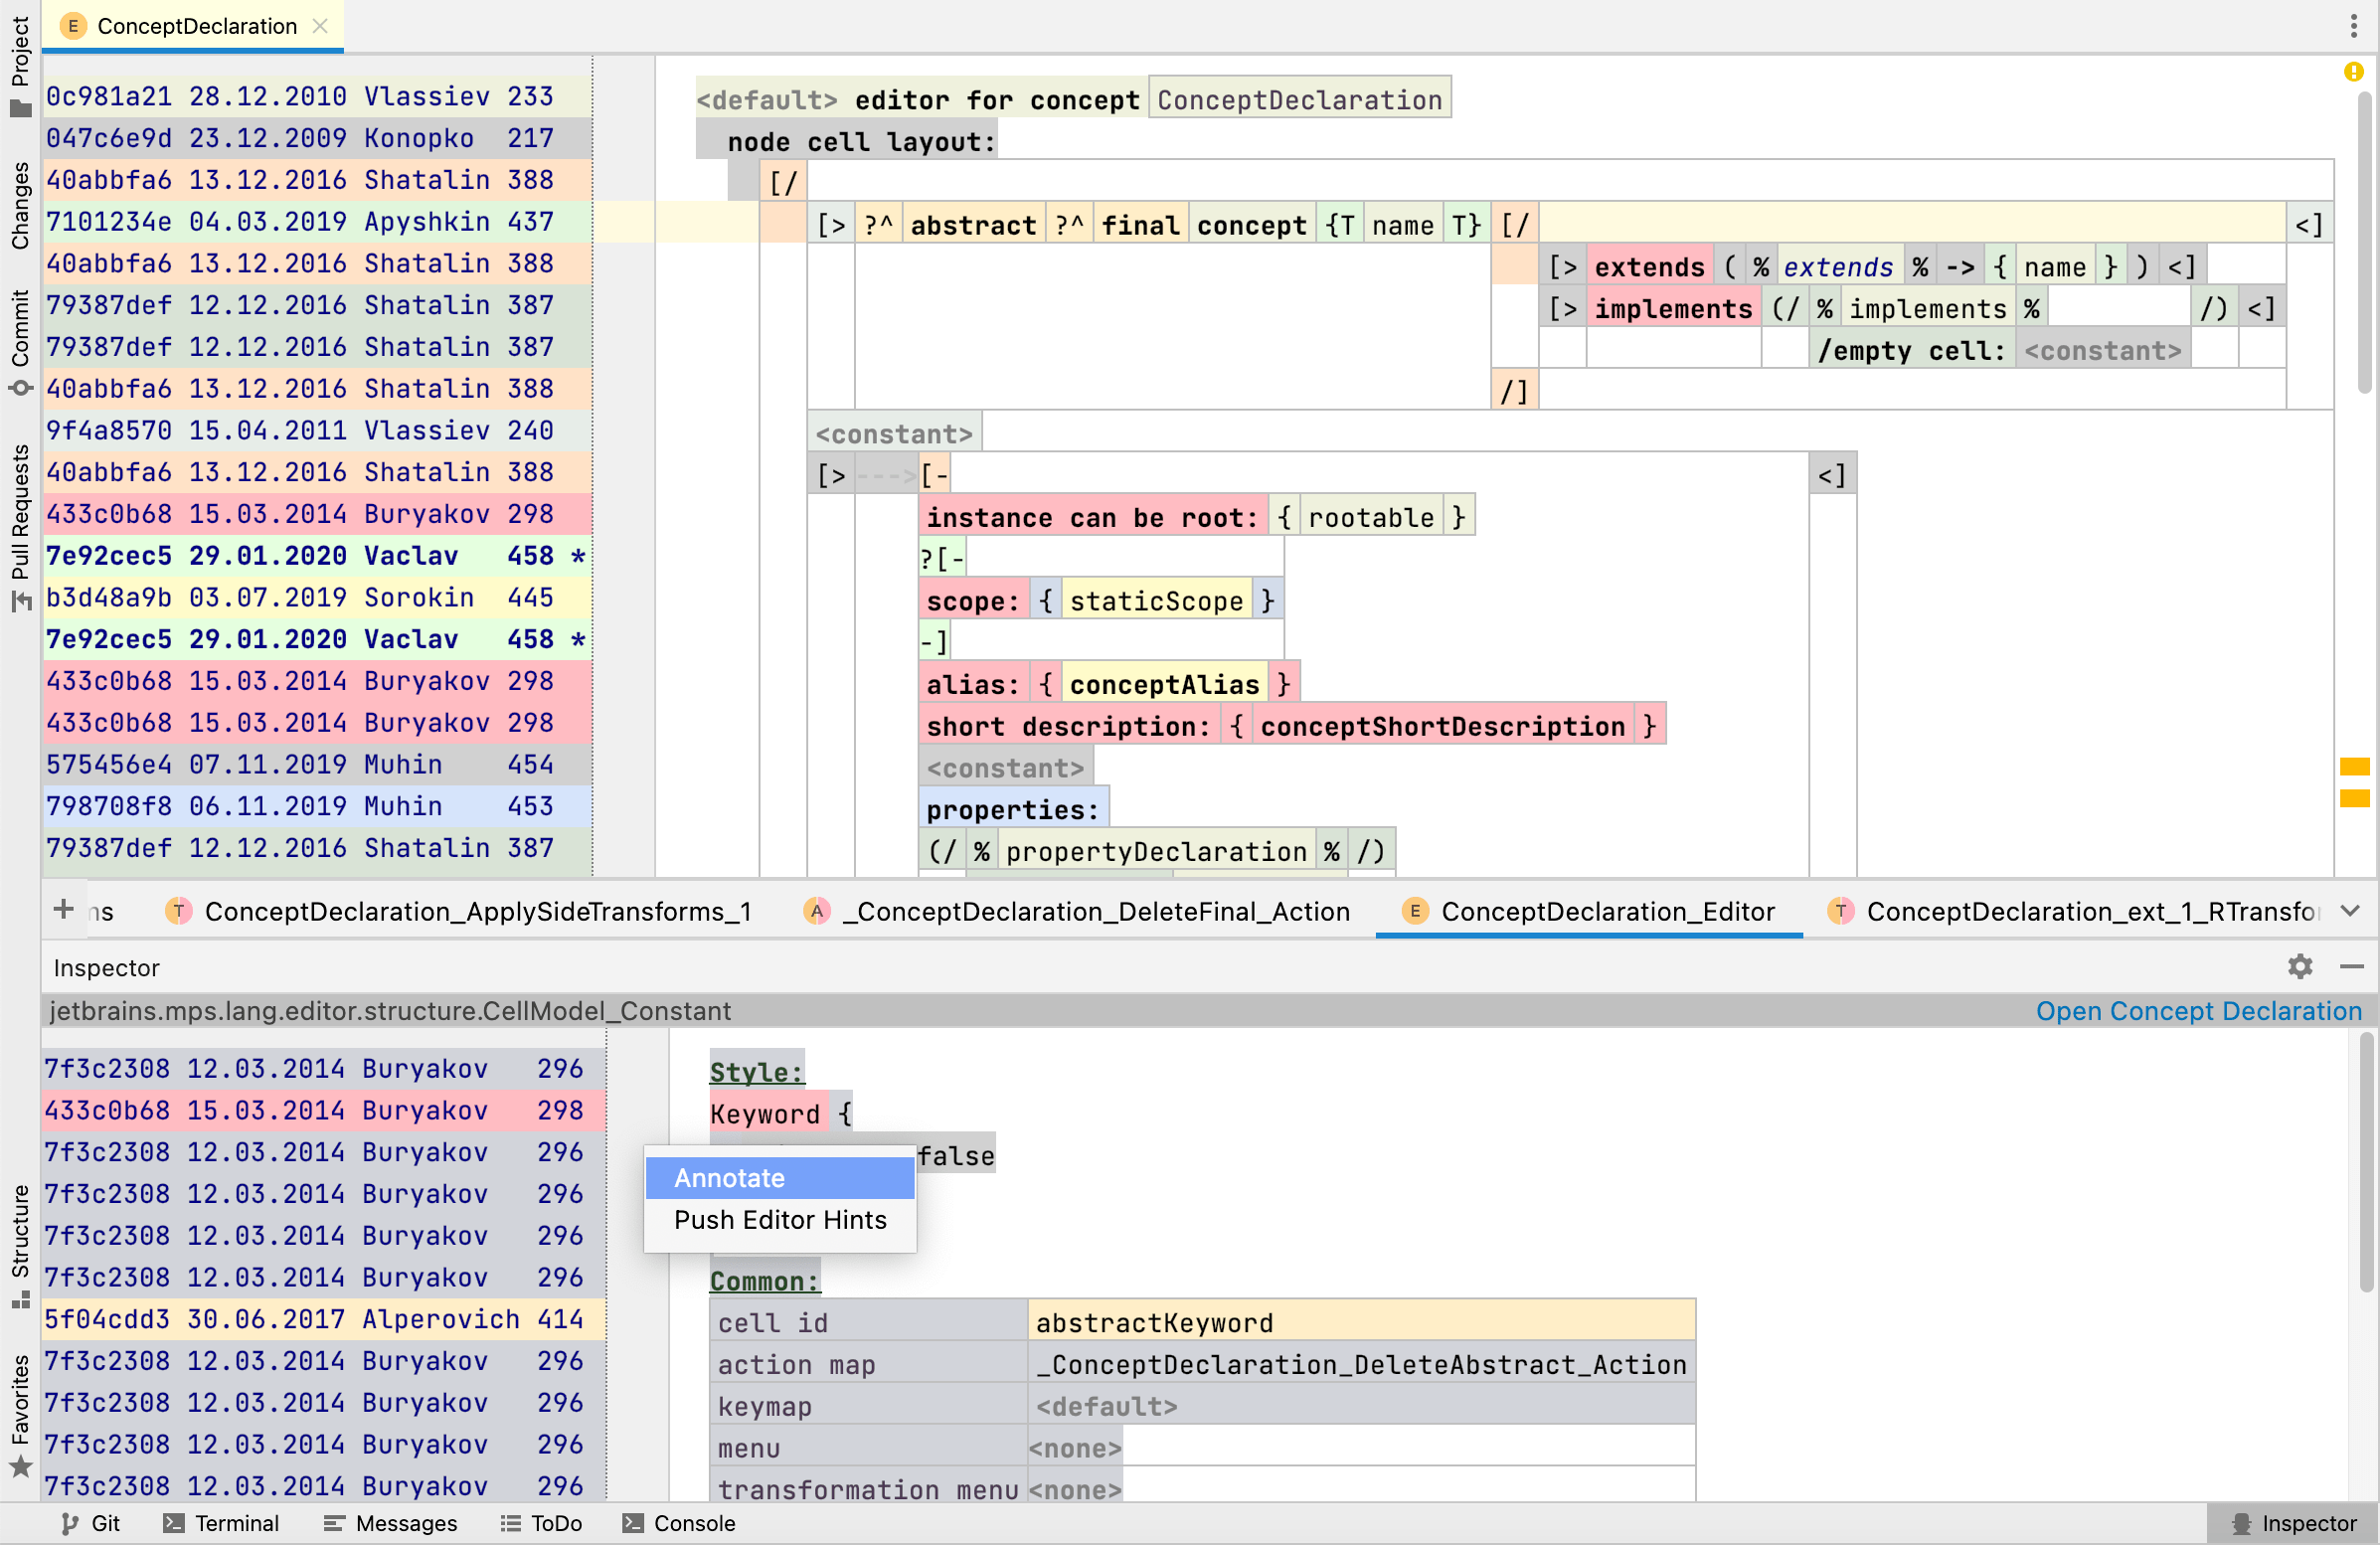 Annotations in Inspector